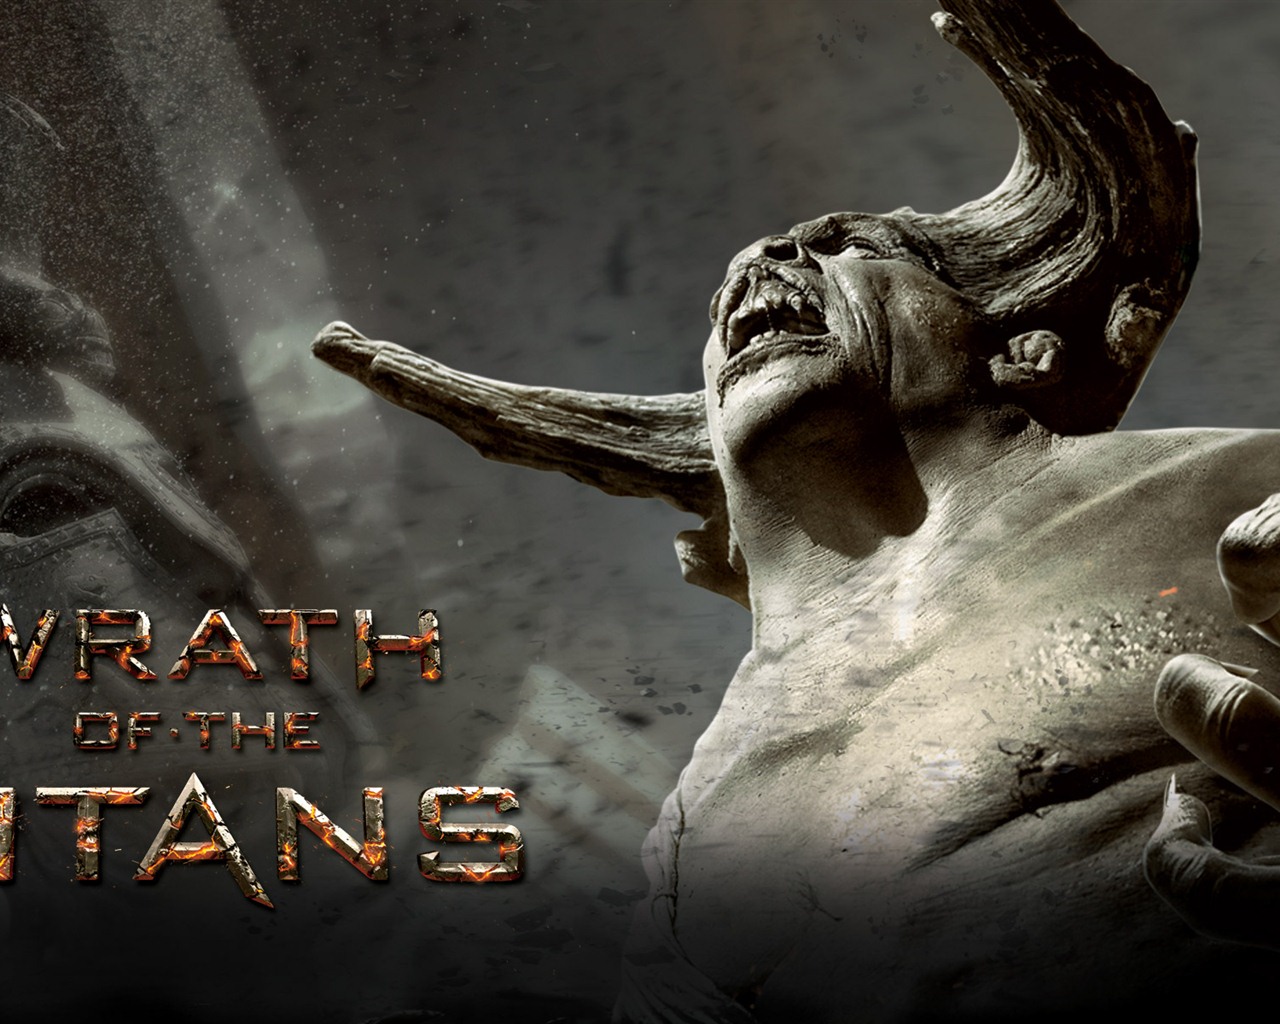 Wrath of the Titans HD wallpapers #7 - 1280x1024